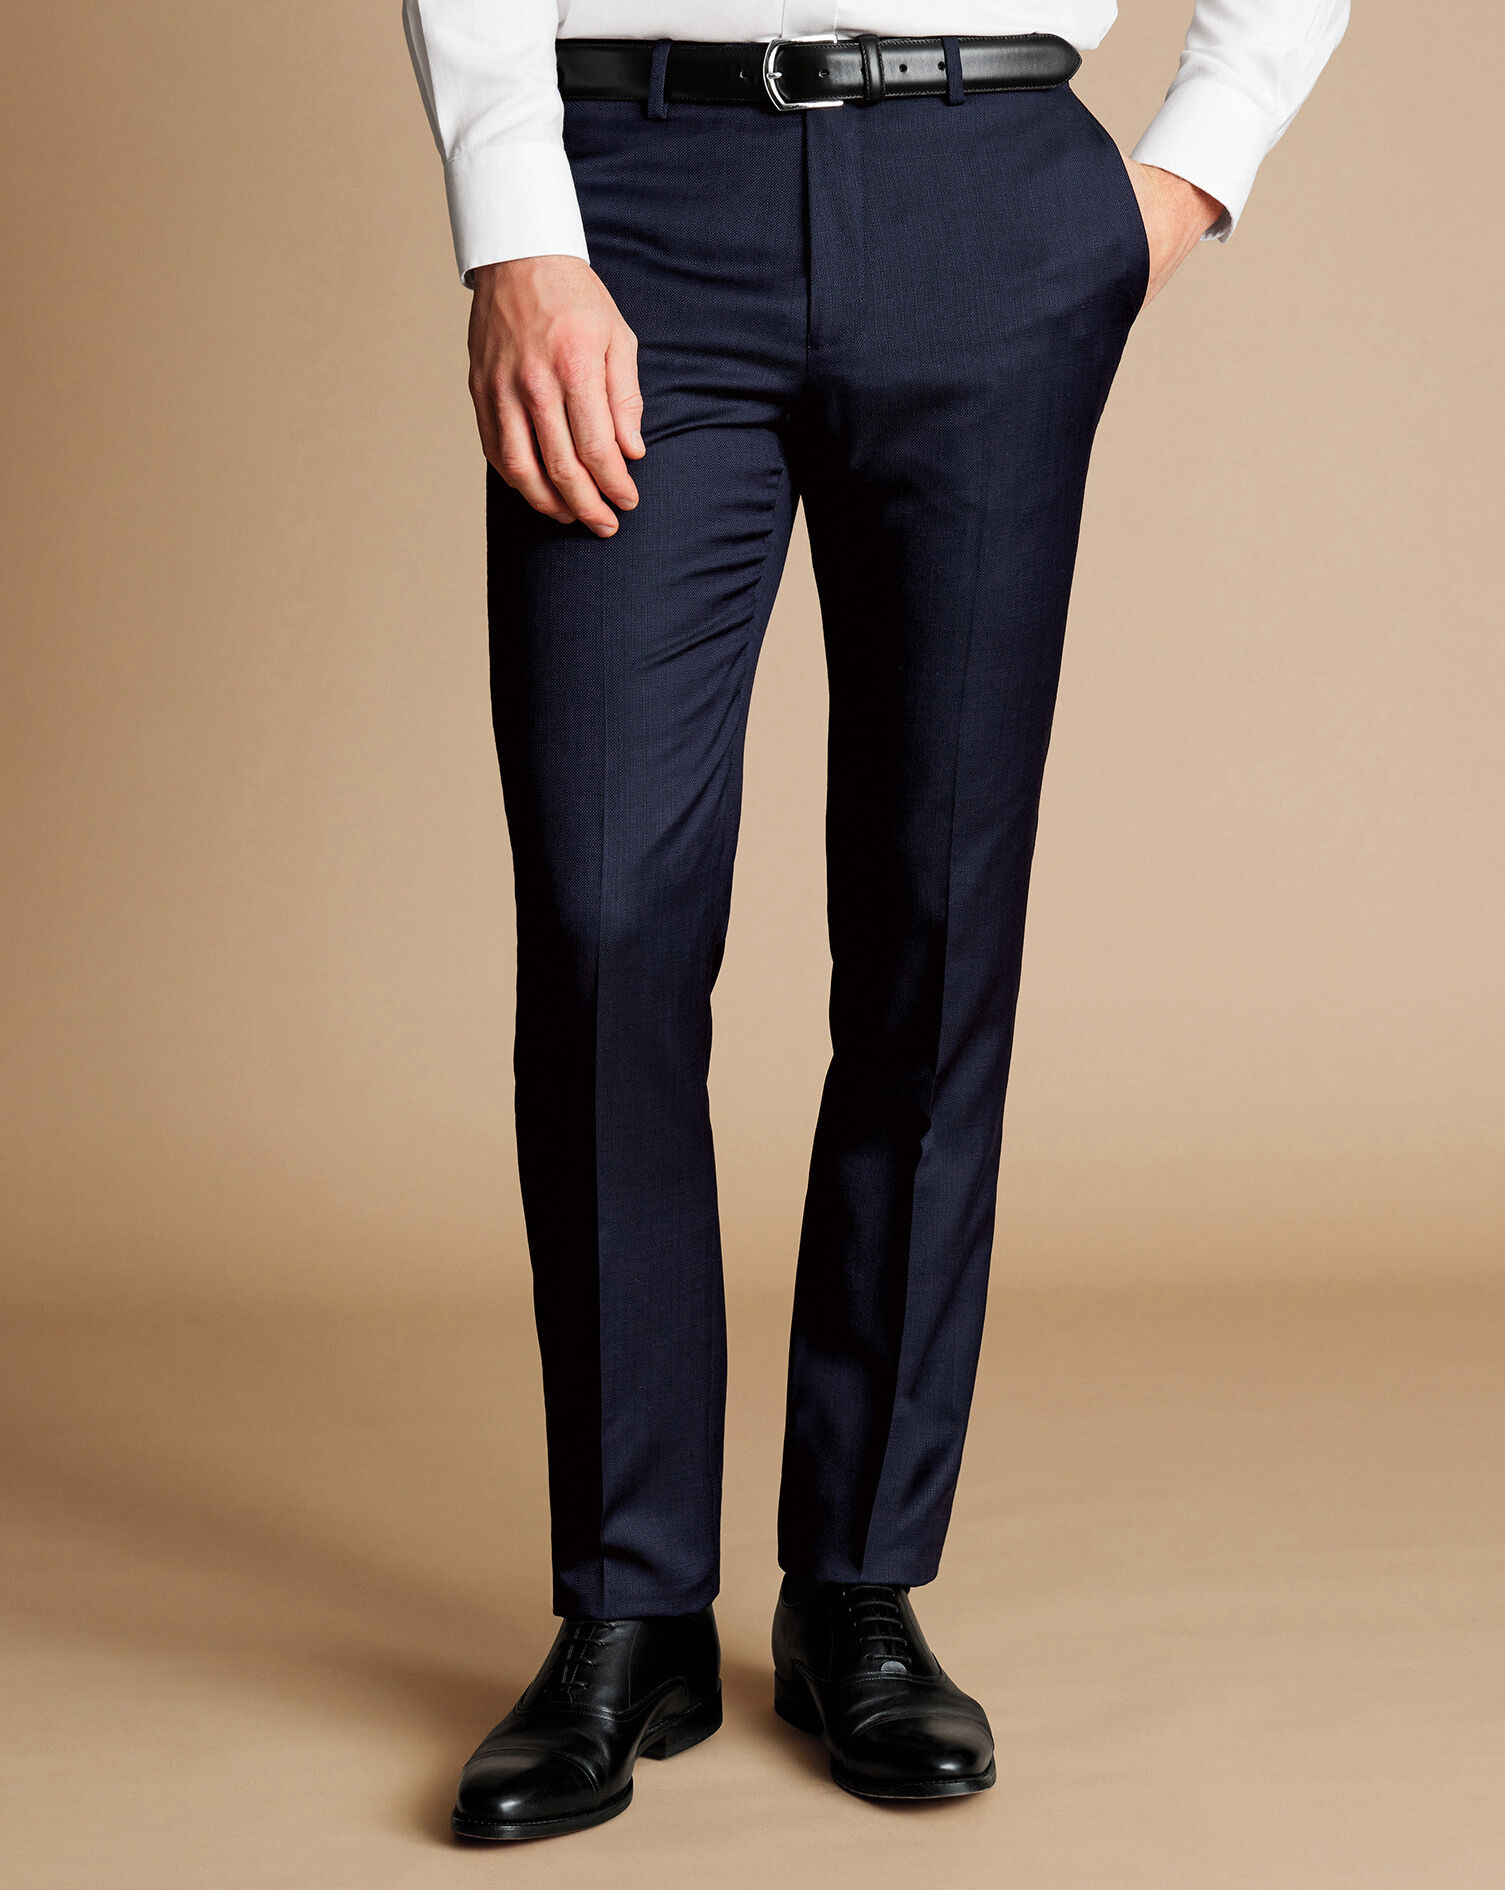 Colorplus Navy Blue Trousers - Buy Colorplus Navy Blue Trousers online in  India